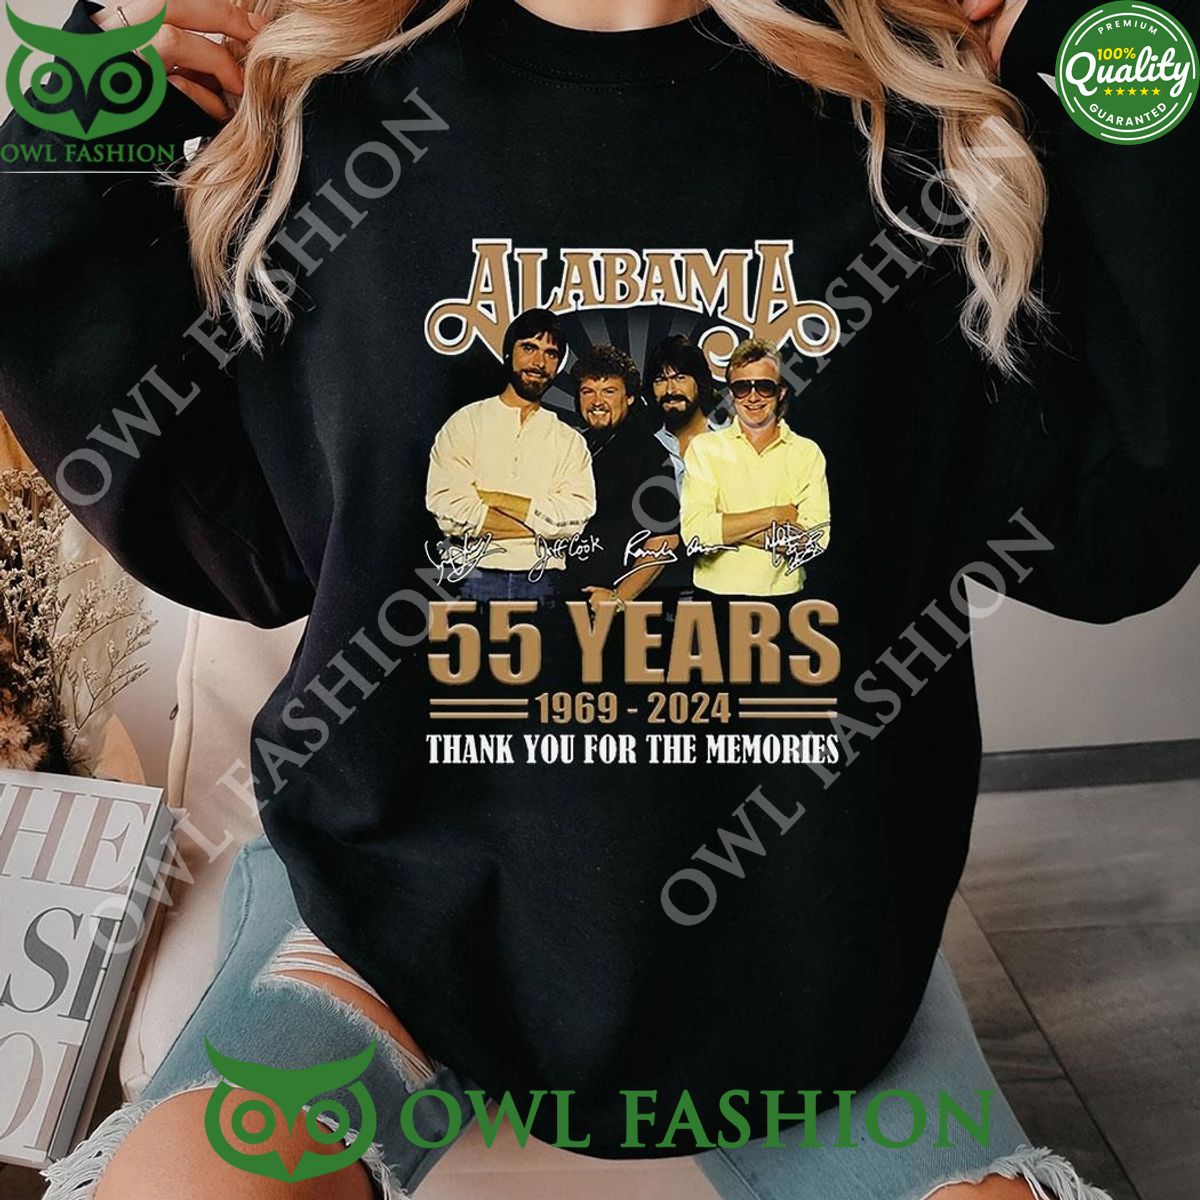 Alabama 55 Years 1969 – 2024 Thank You For The Memories t shirt